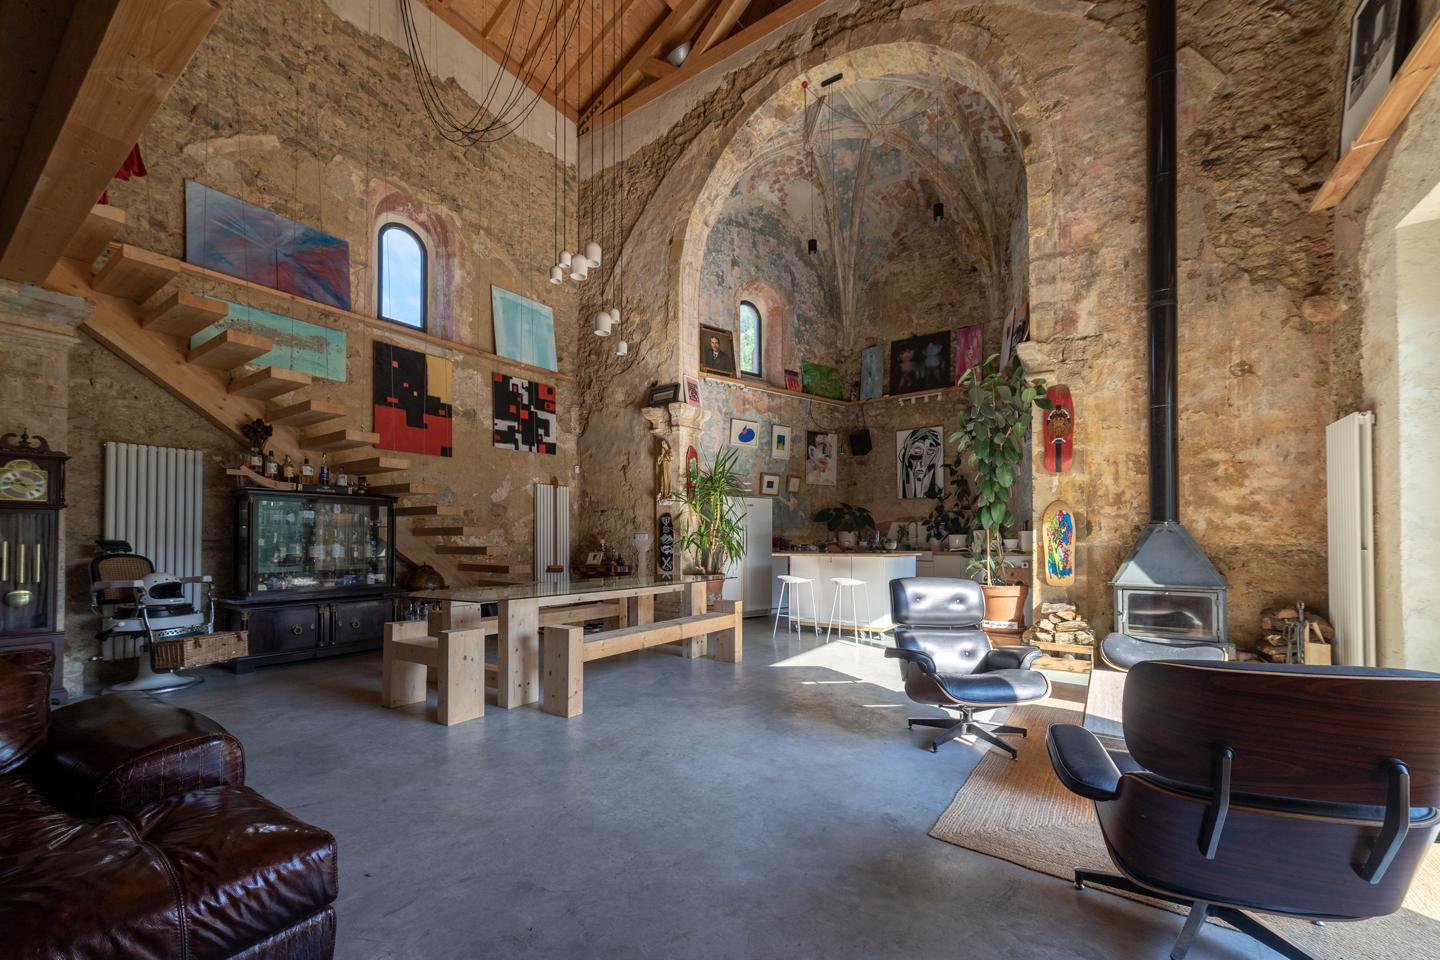 XVI CENTURY CHURCH CONVERTED INTO LUXURY HOME FOR SALE FOR 1.6 MILLION